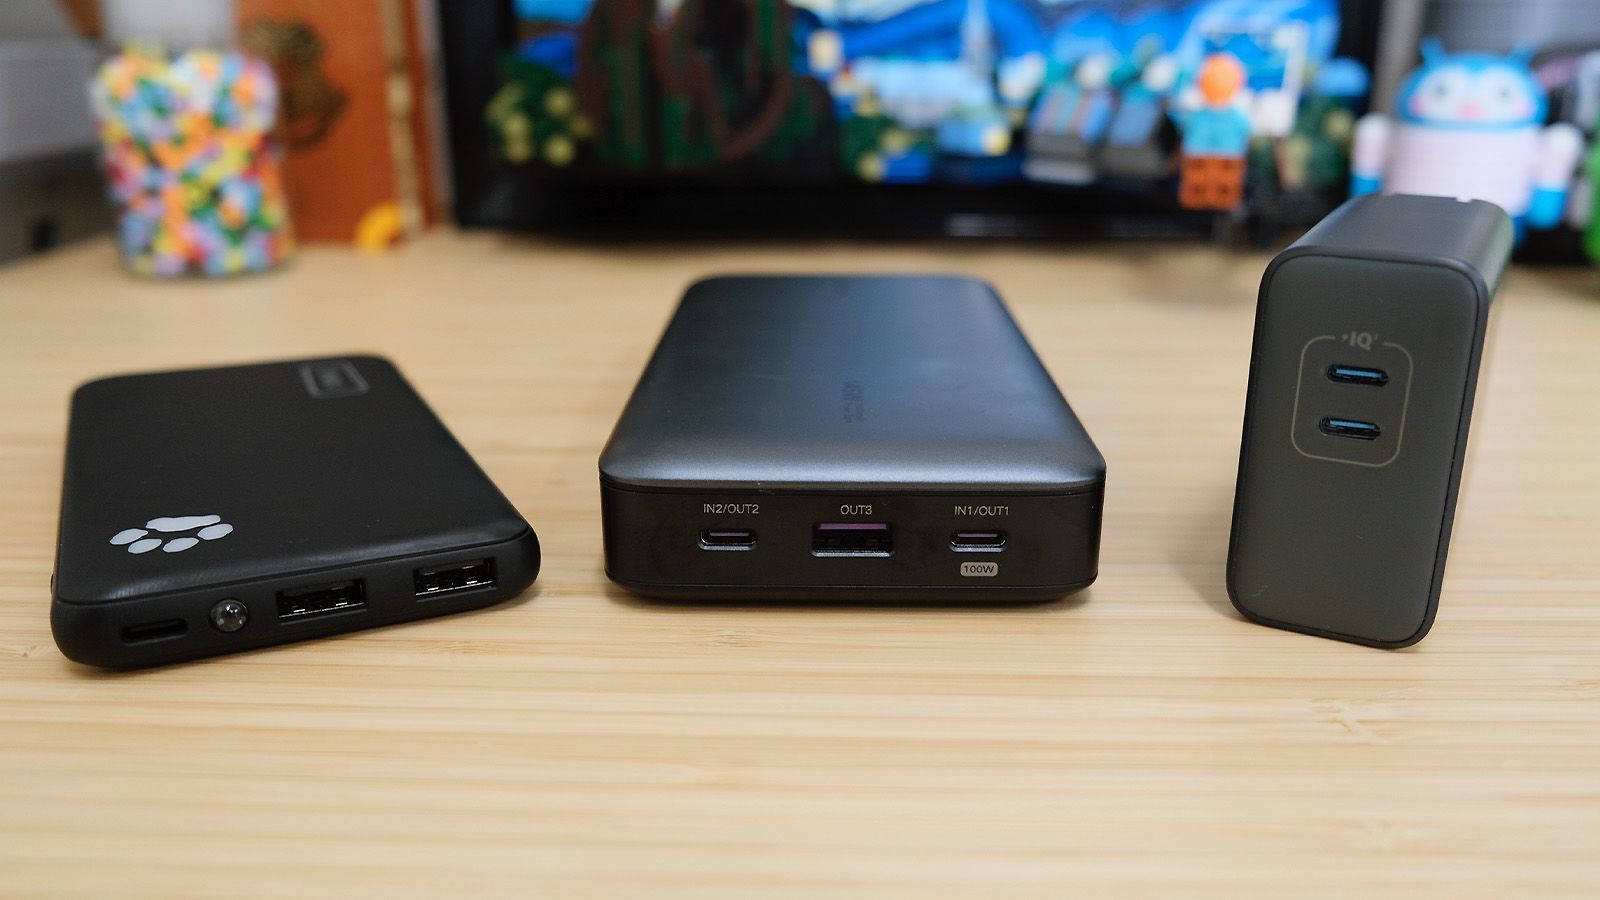 The Anker Nano Power Bank may be the LAST perfect Lightning